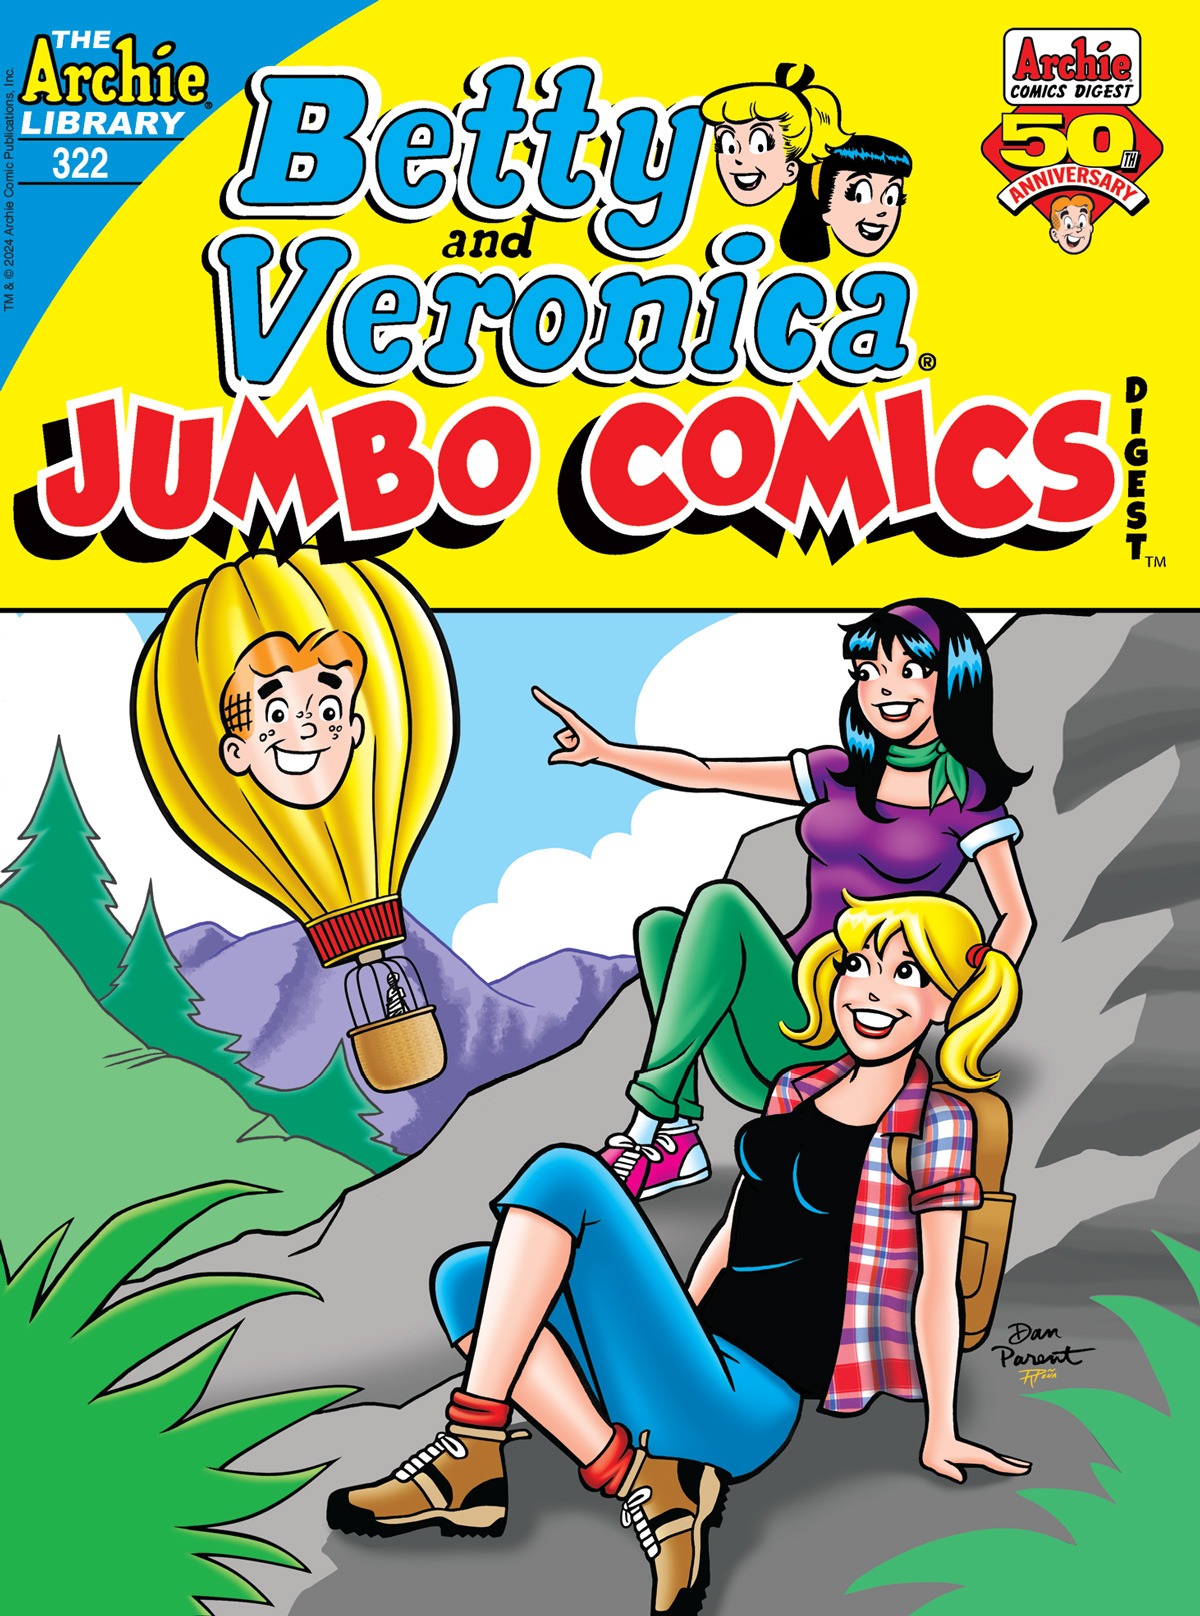 Cover of Betty and Veronica Jumbo Comics Digest #322, showing Betty and Veronica sitting on a hillside, smiling, as Veronica points to a hot-air balloon floating nearby with a giant Archie face on it.